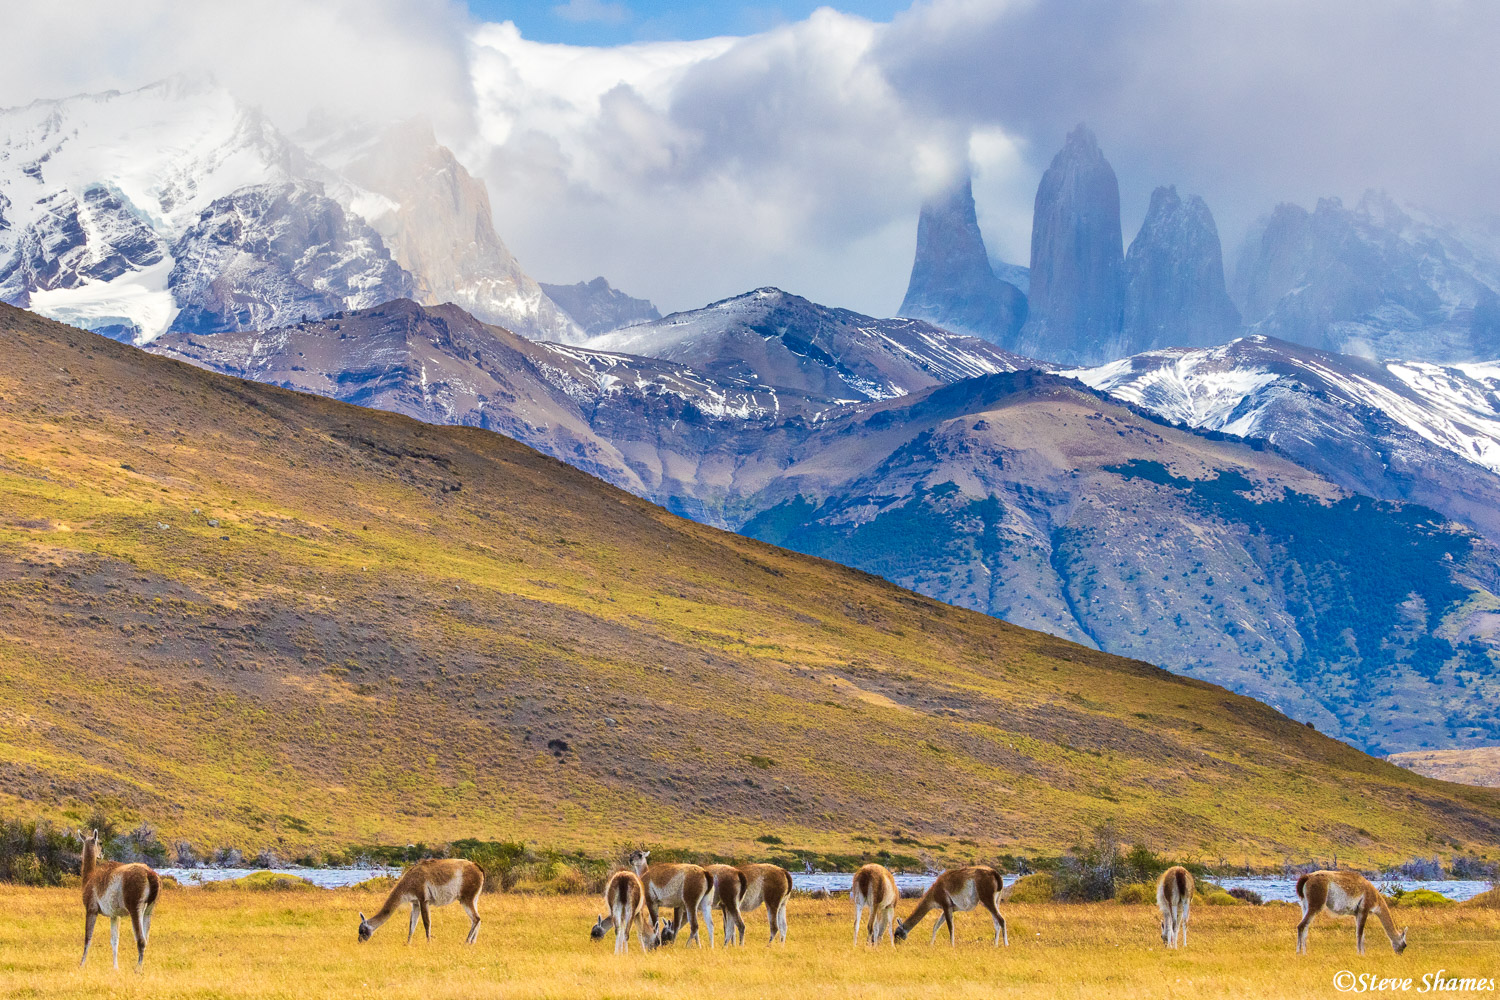 The Towers looming large in the background, overlooking a herd of guanacos.